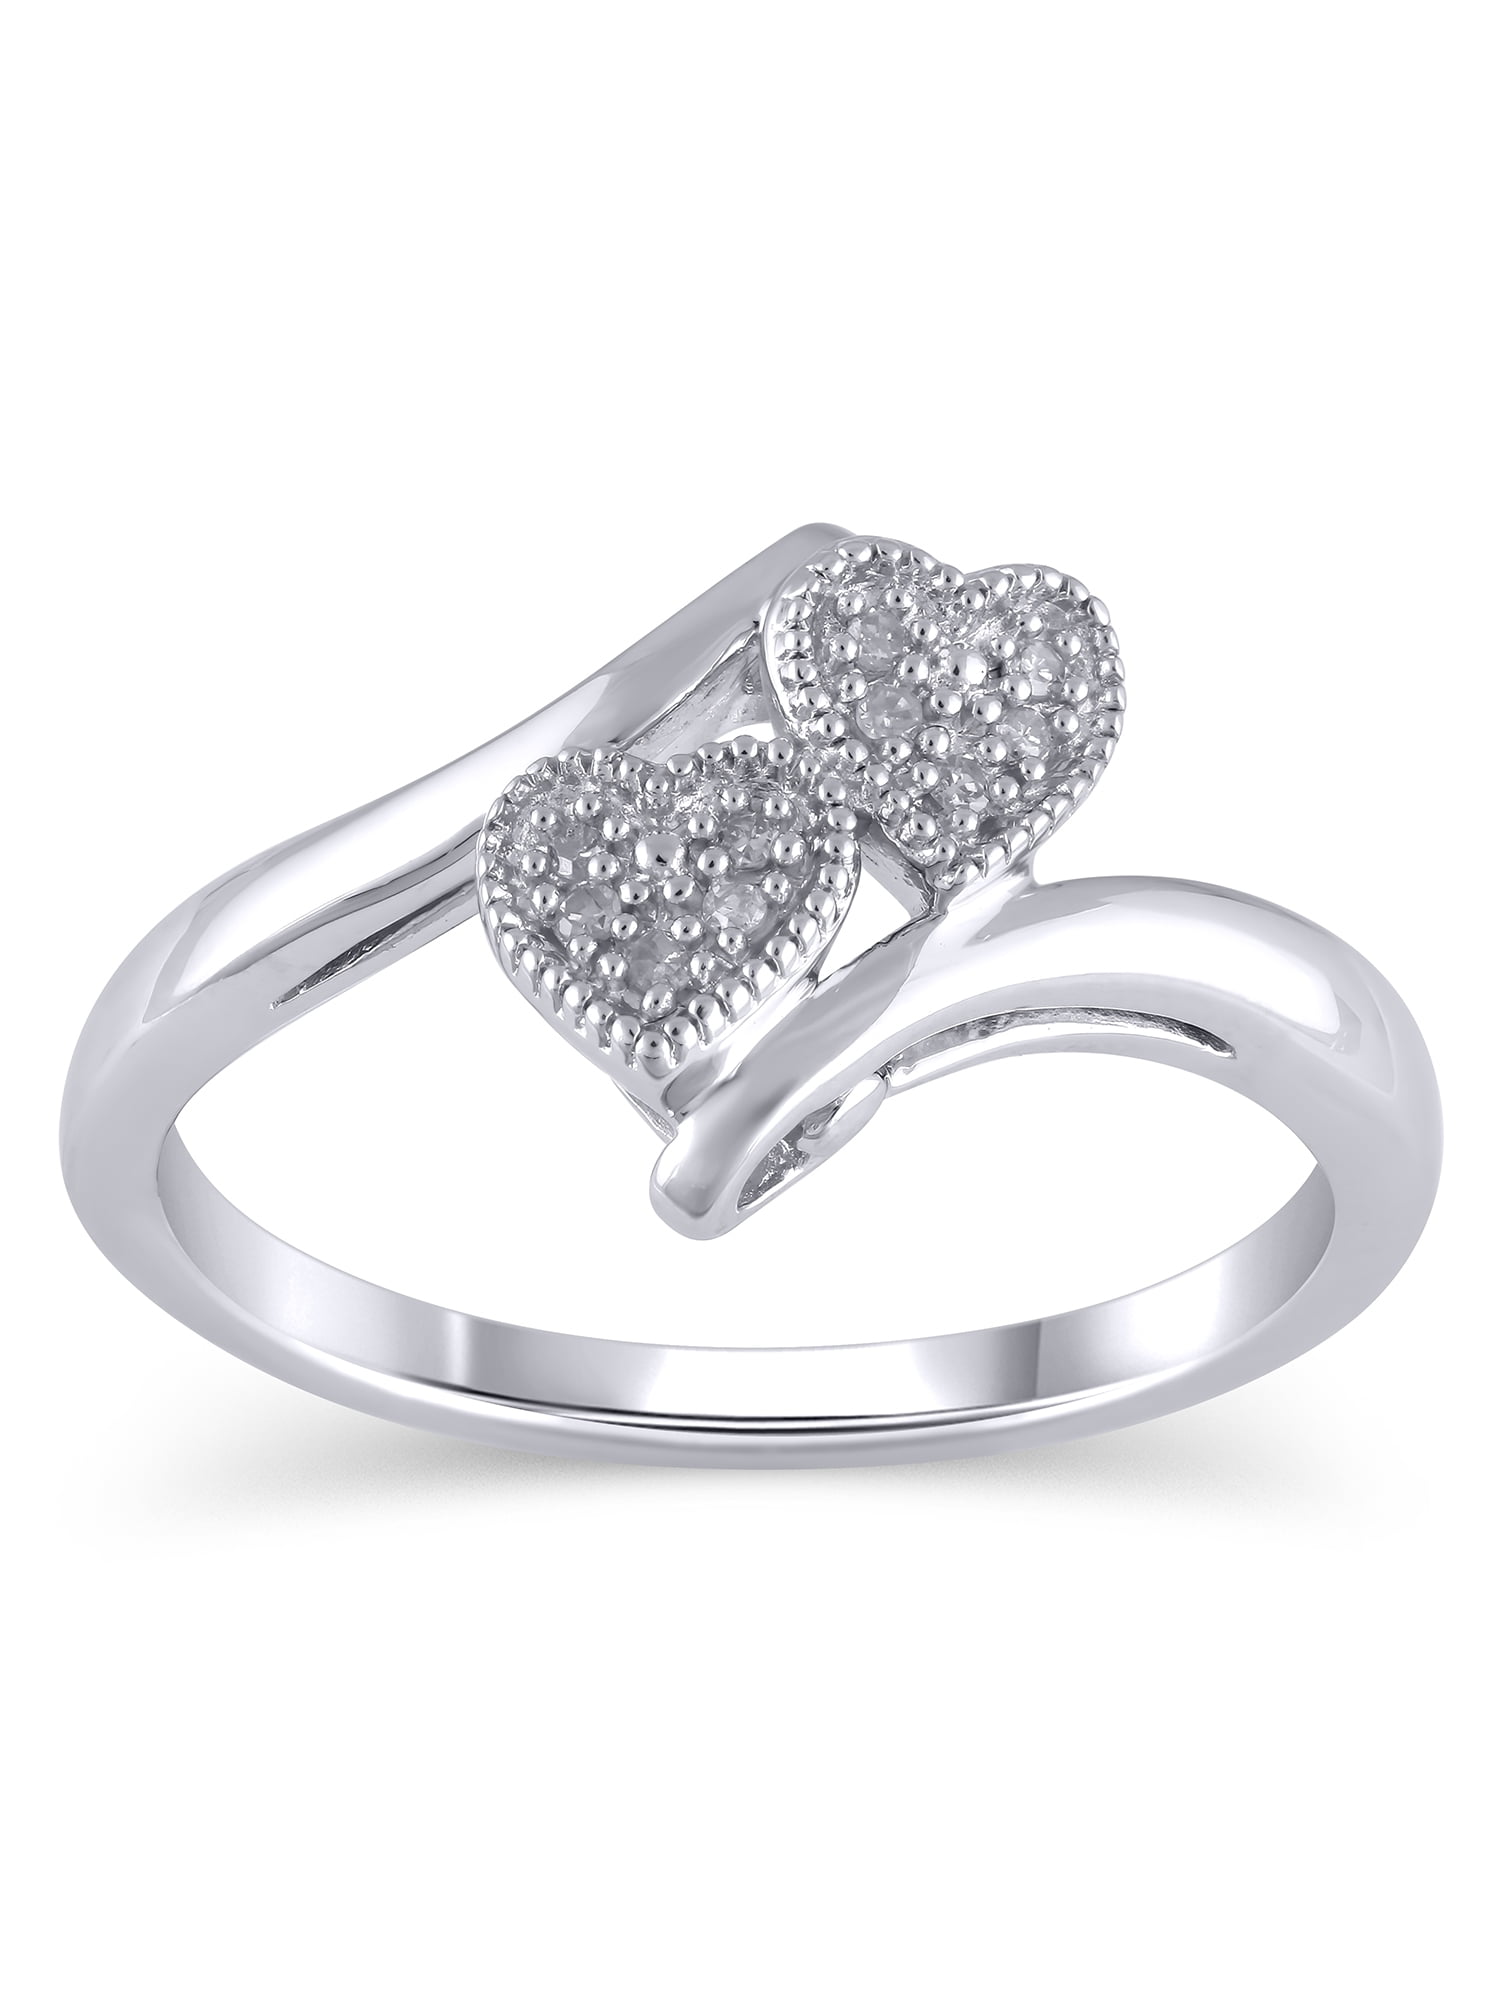 Crown Heart Tiara White CZ Promise Ring ( Sizes 5 6 7 8 9 10 ) New .925  Sterling Silver Band Rings (Size 5) - Walmart.com